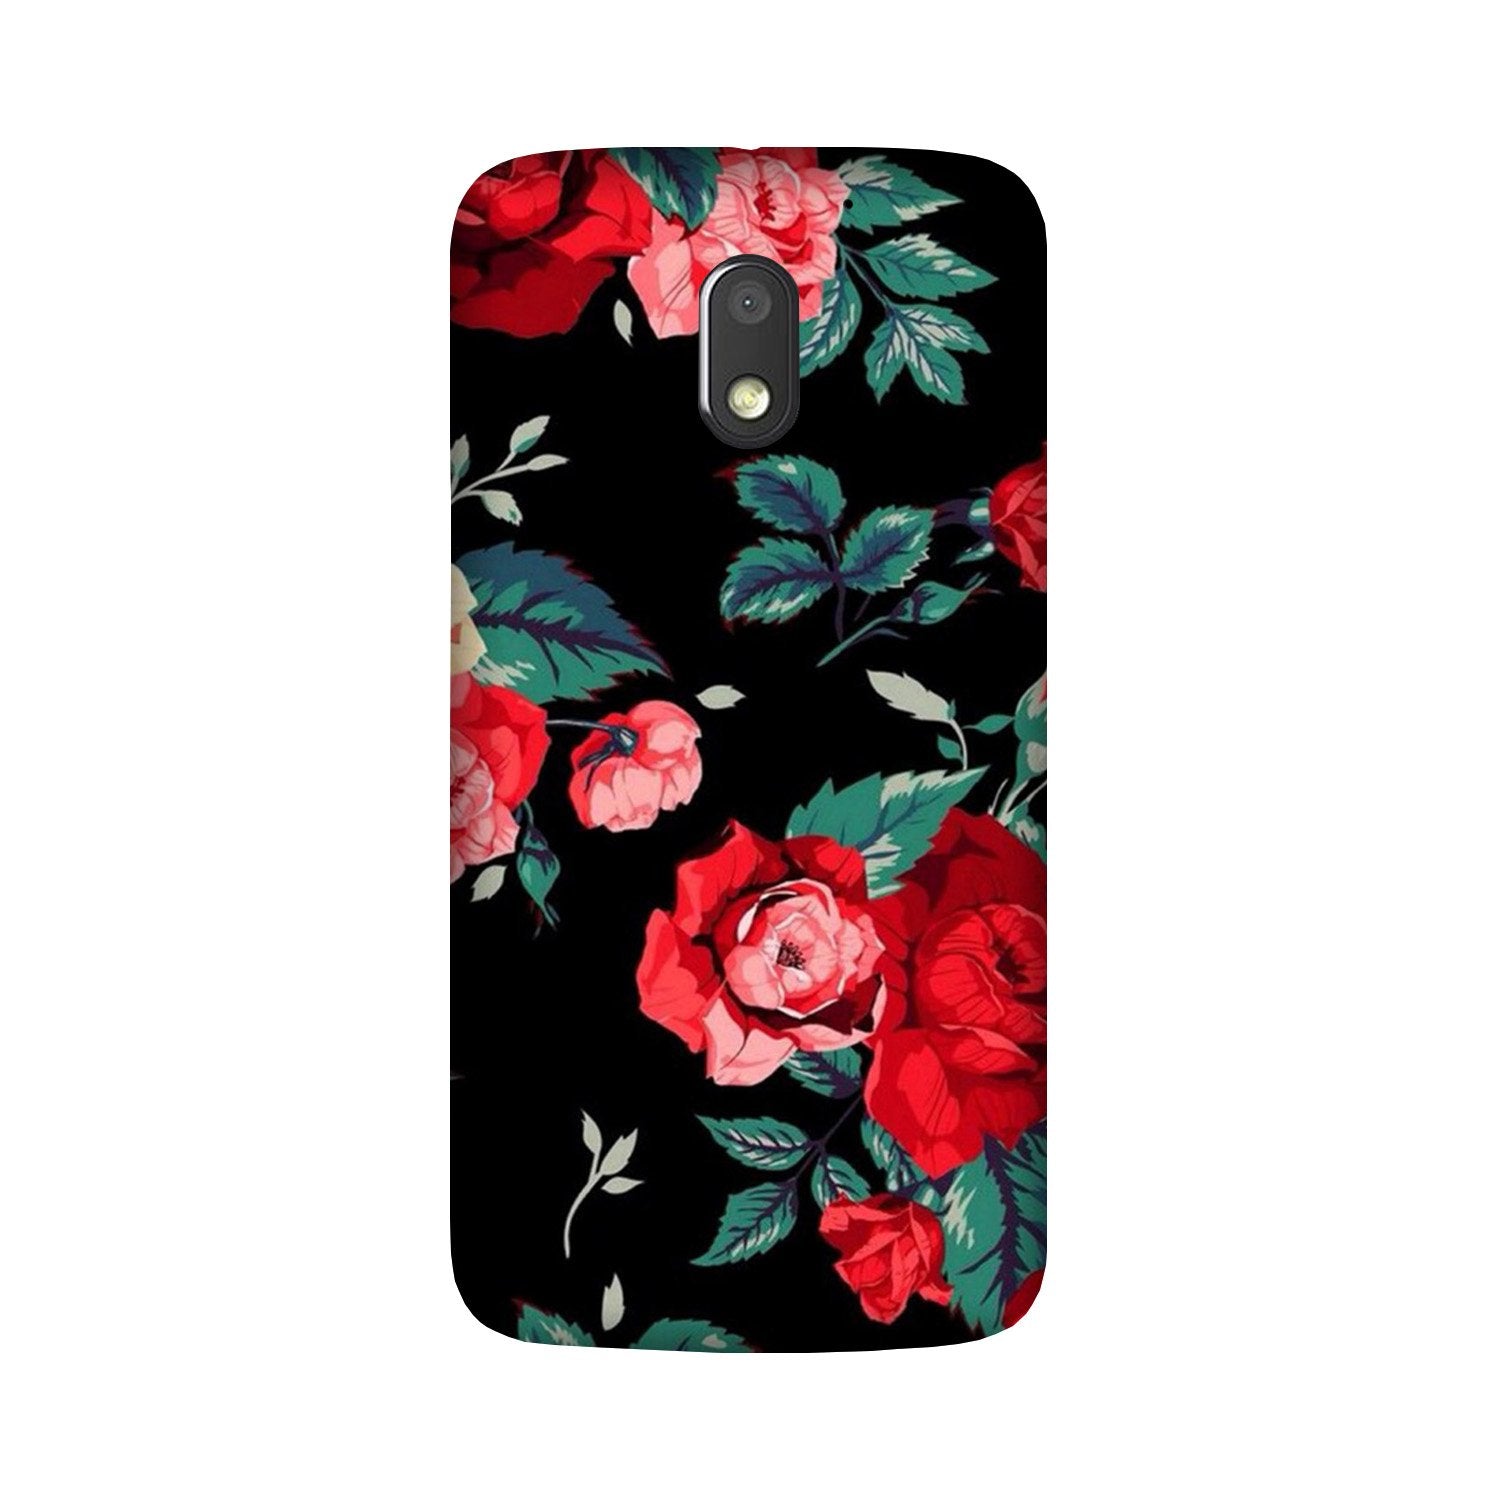 Red Rose2 Case for Moto G4 Play